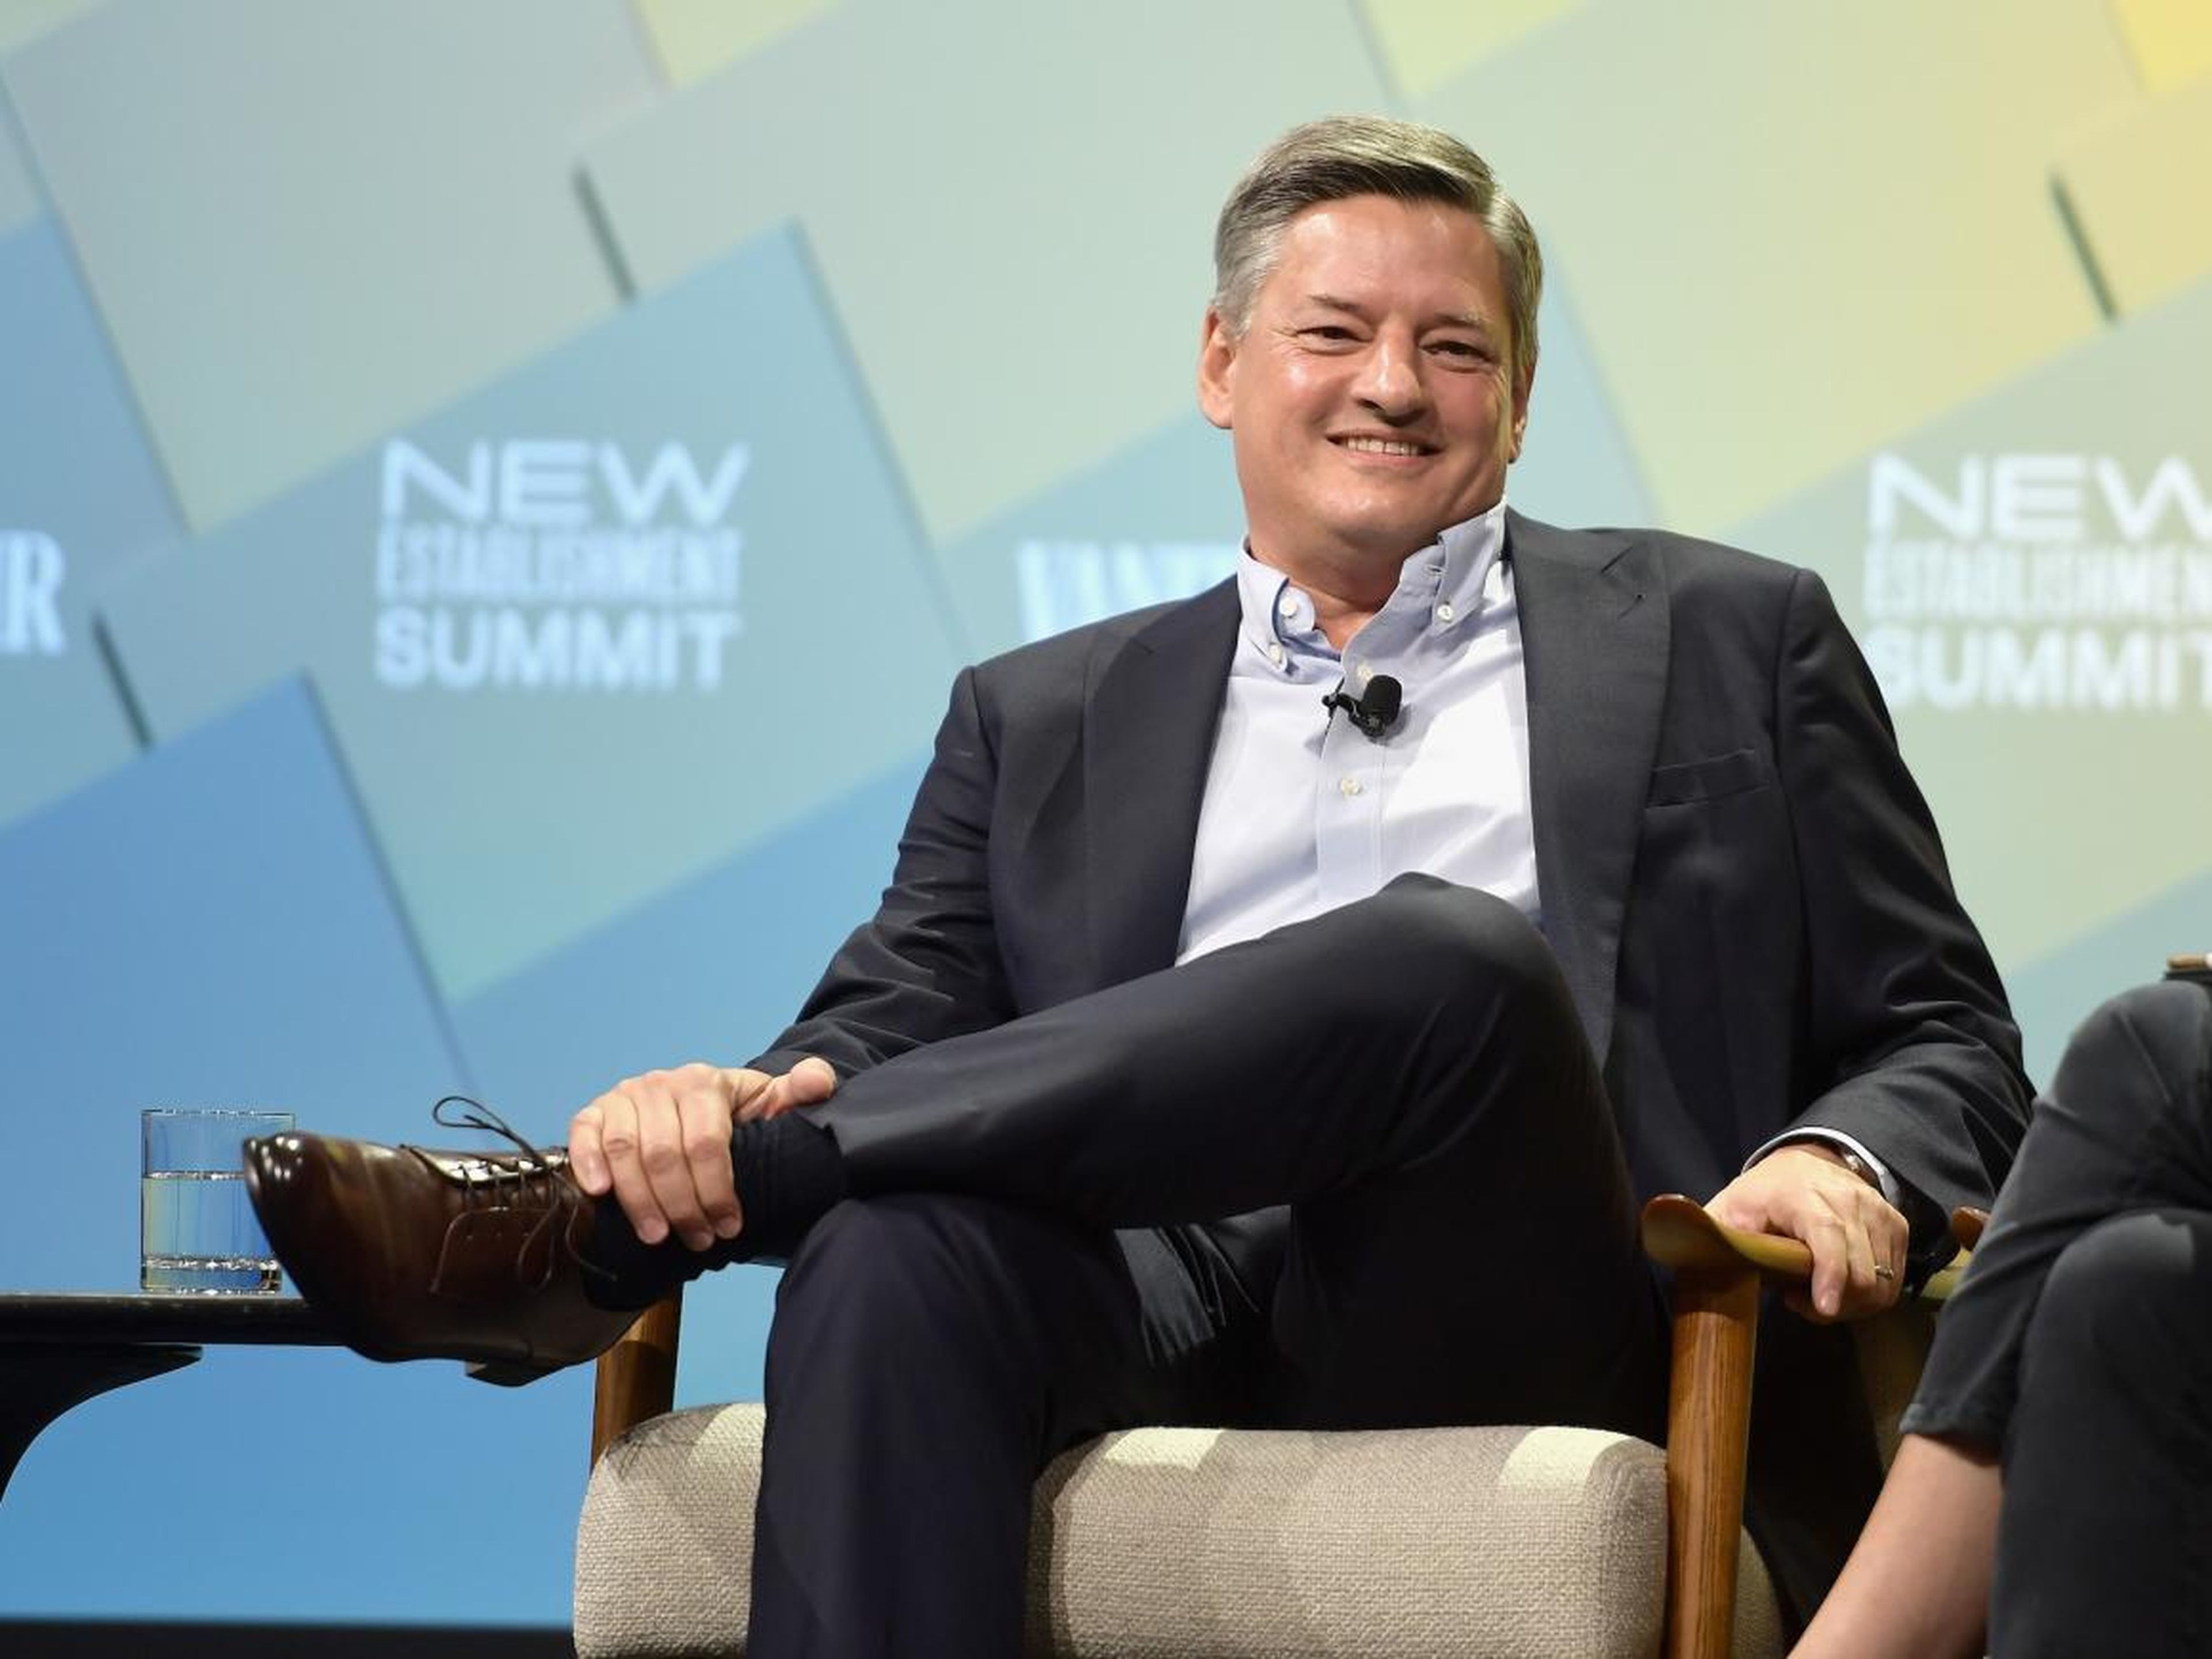 Chief Content Officer Ted Sarandos reportedly implemented an open-salary policy at Netflix.